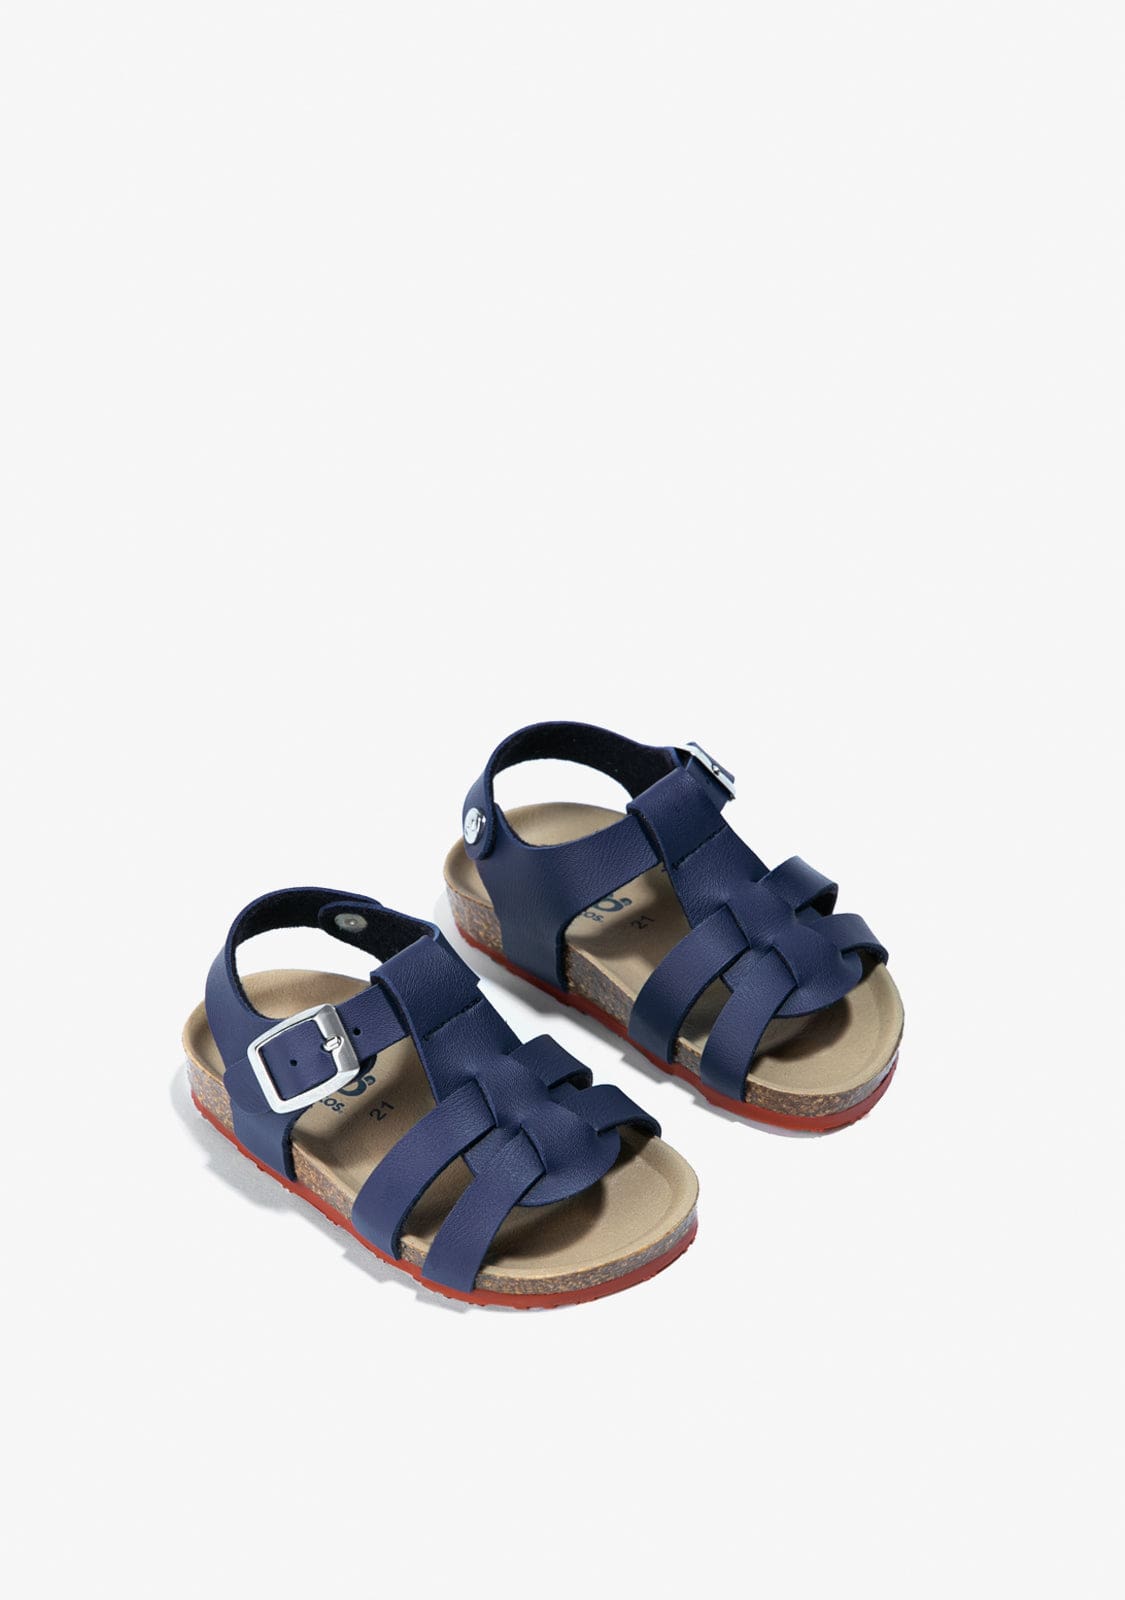 OSITO Shoes Baby's Navy Bio Buckle Sandals